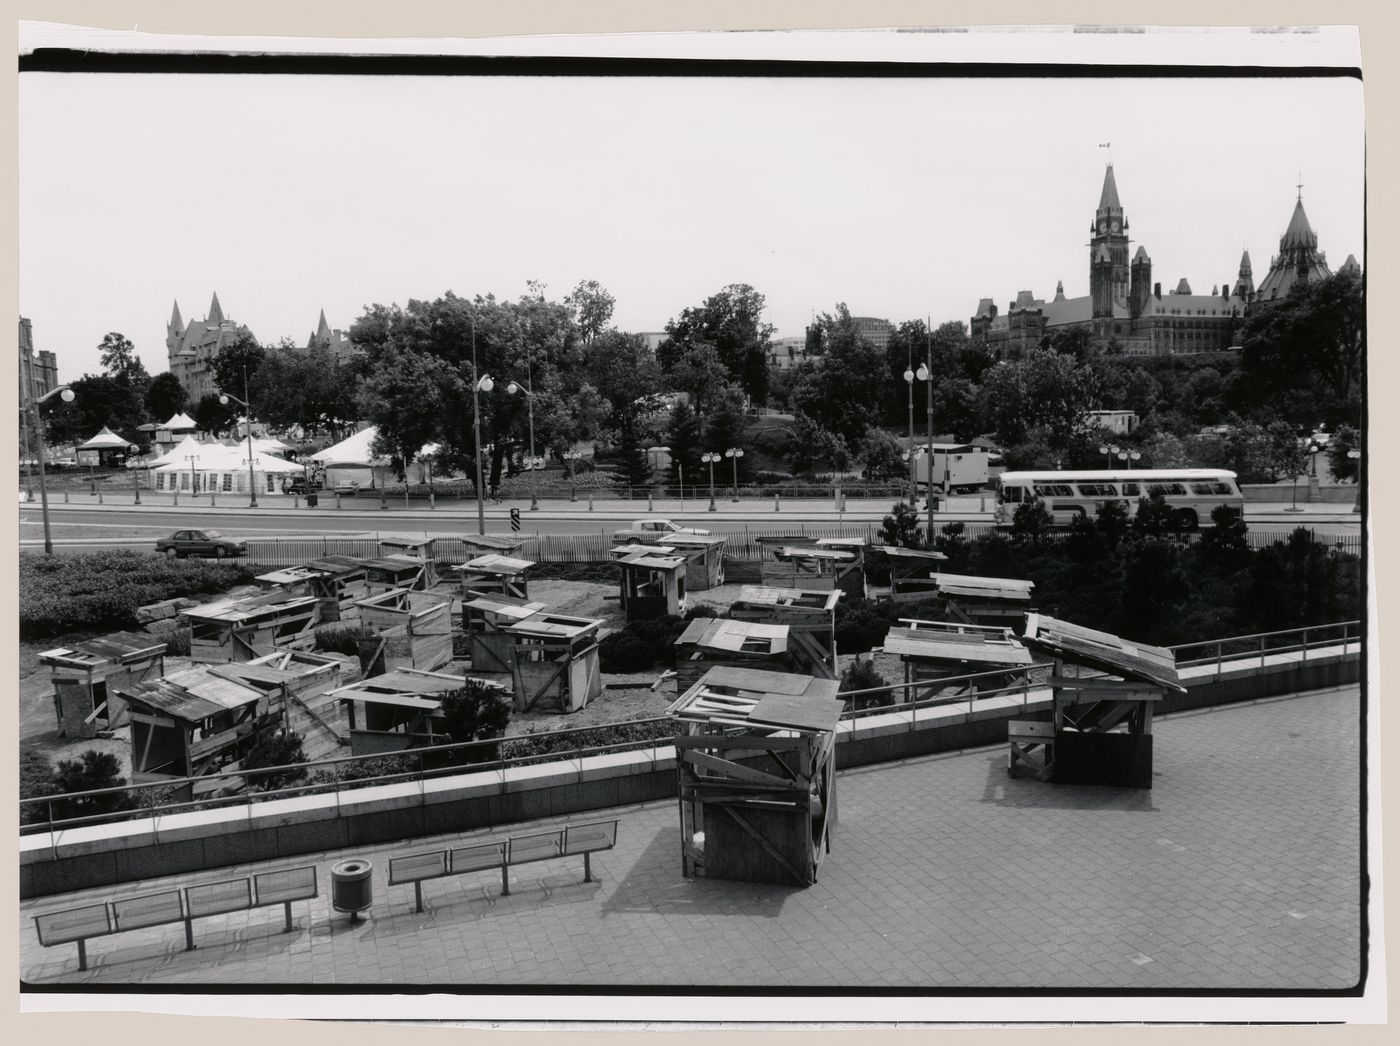 View of the installation "Favela in Ottawa", comprising wooden shack-like structures in the Taiga Garden of the National Gallery of Canada, showing the Parliament Buildings, Ottawa, Ontario